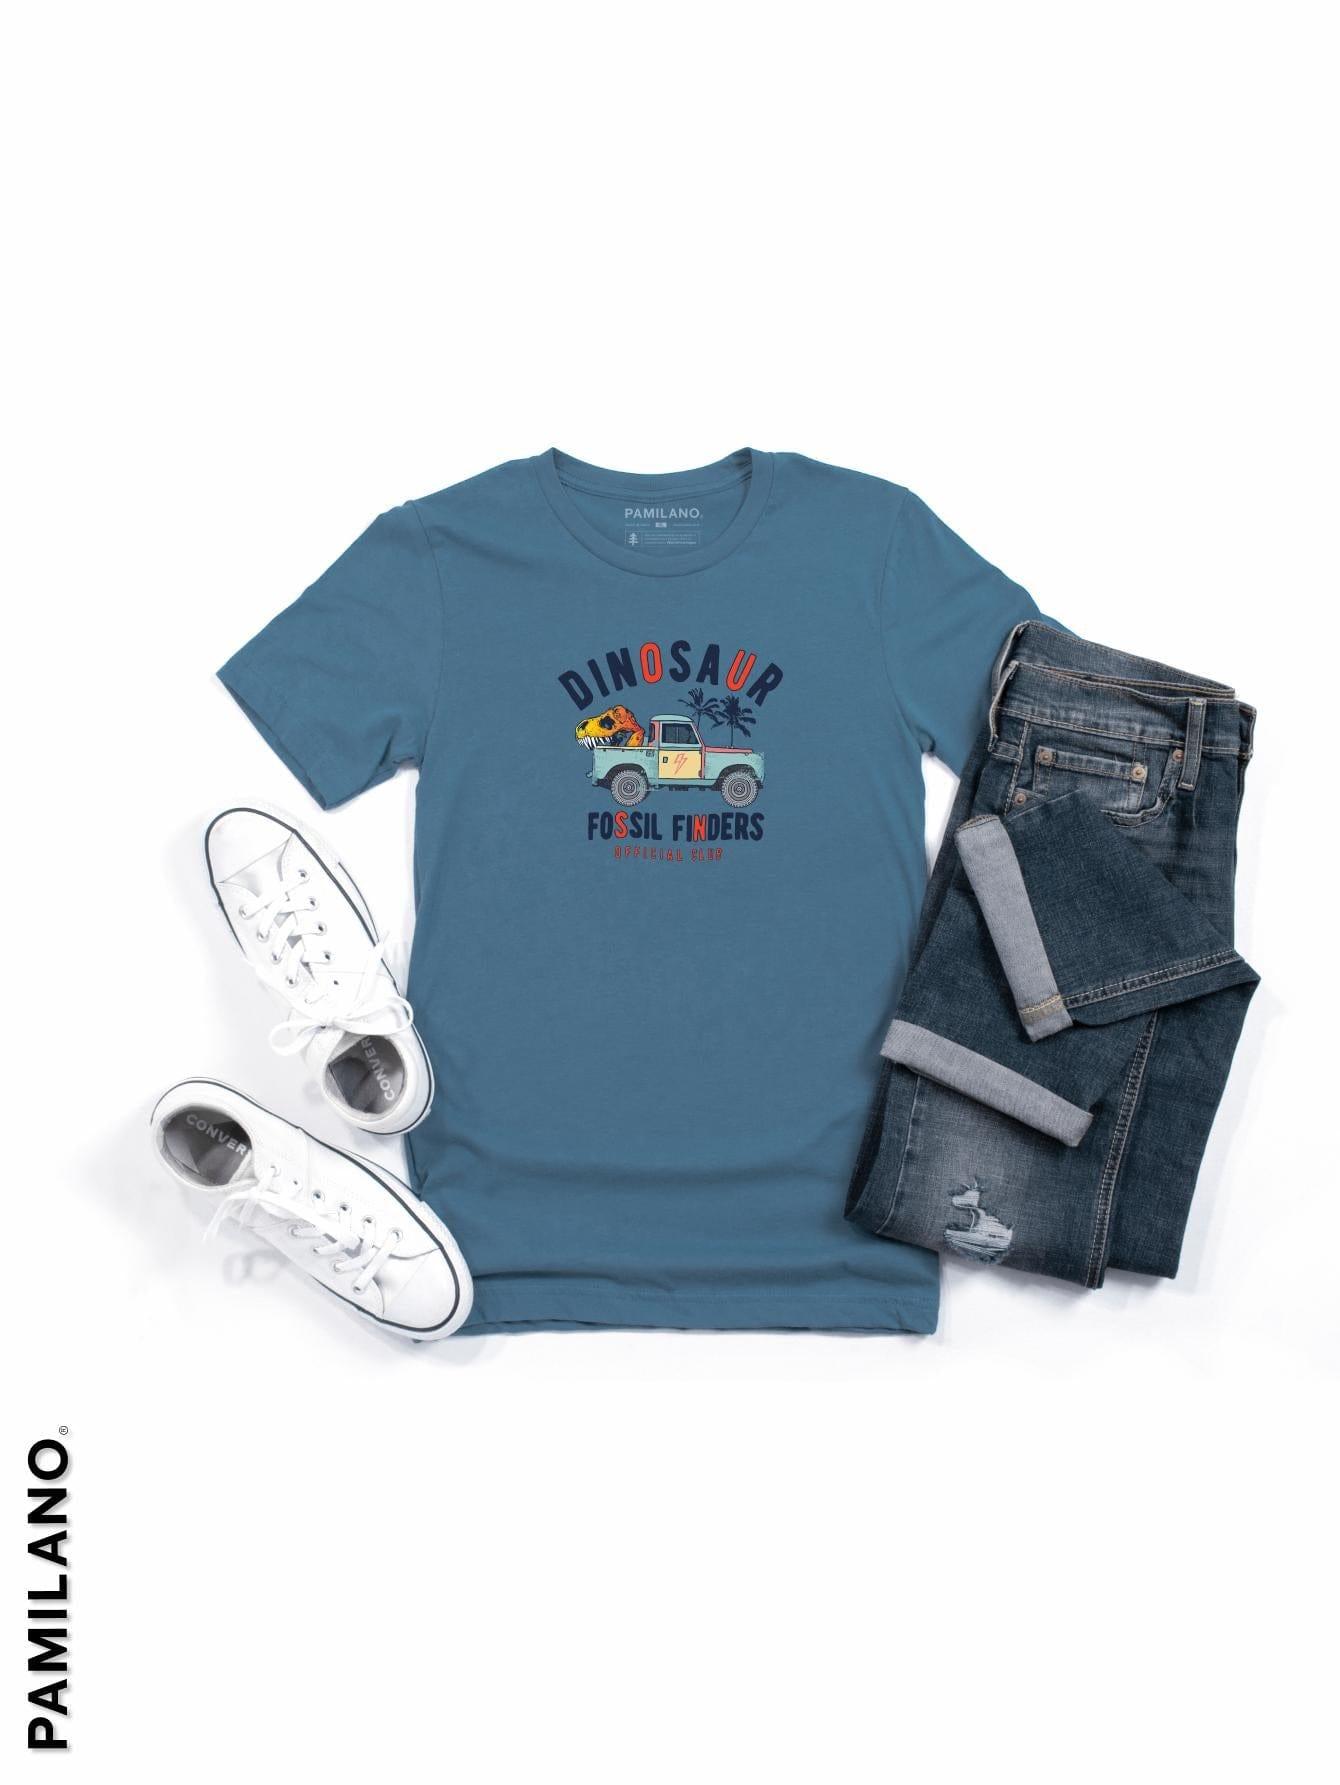 Fossil Finders graphic round neck tee for kids Art# 200K-294 - PAMILANO